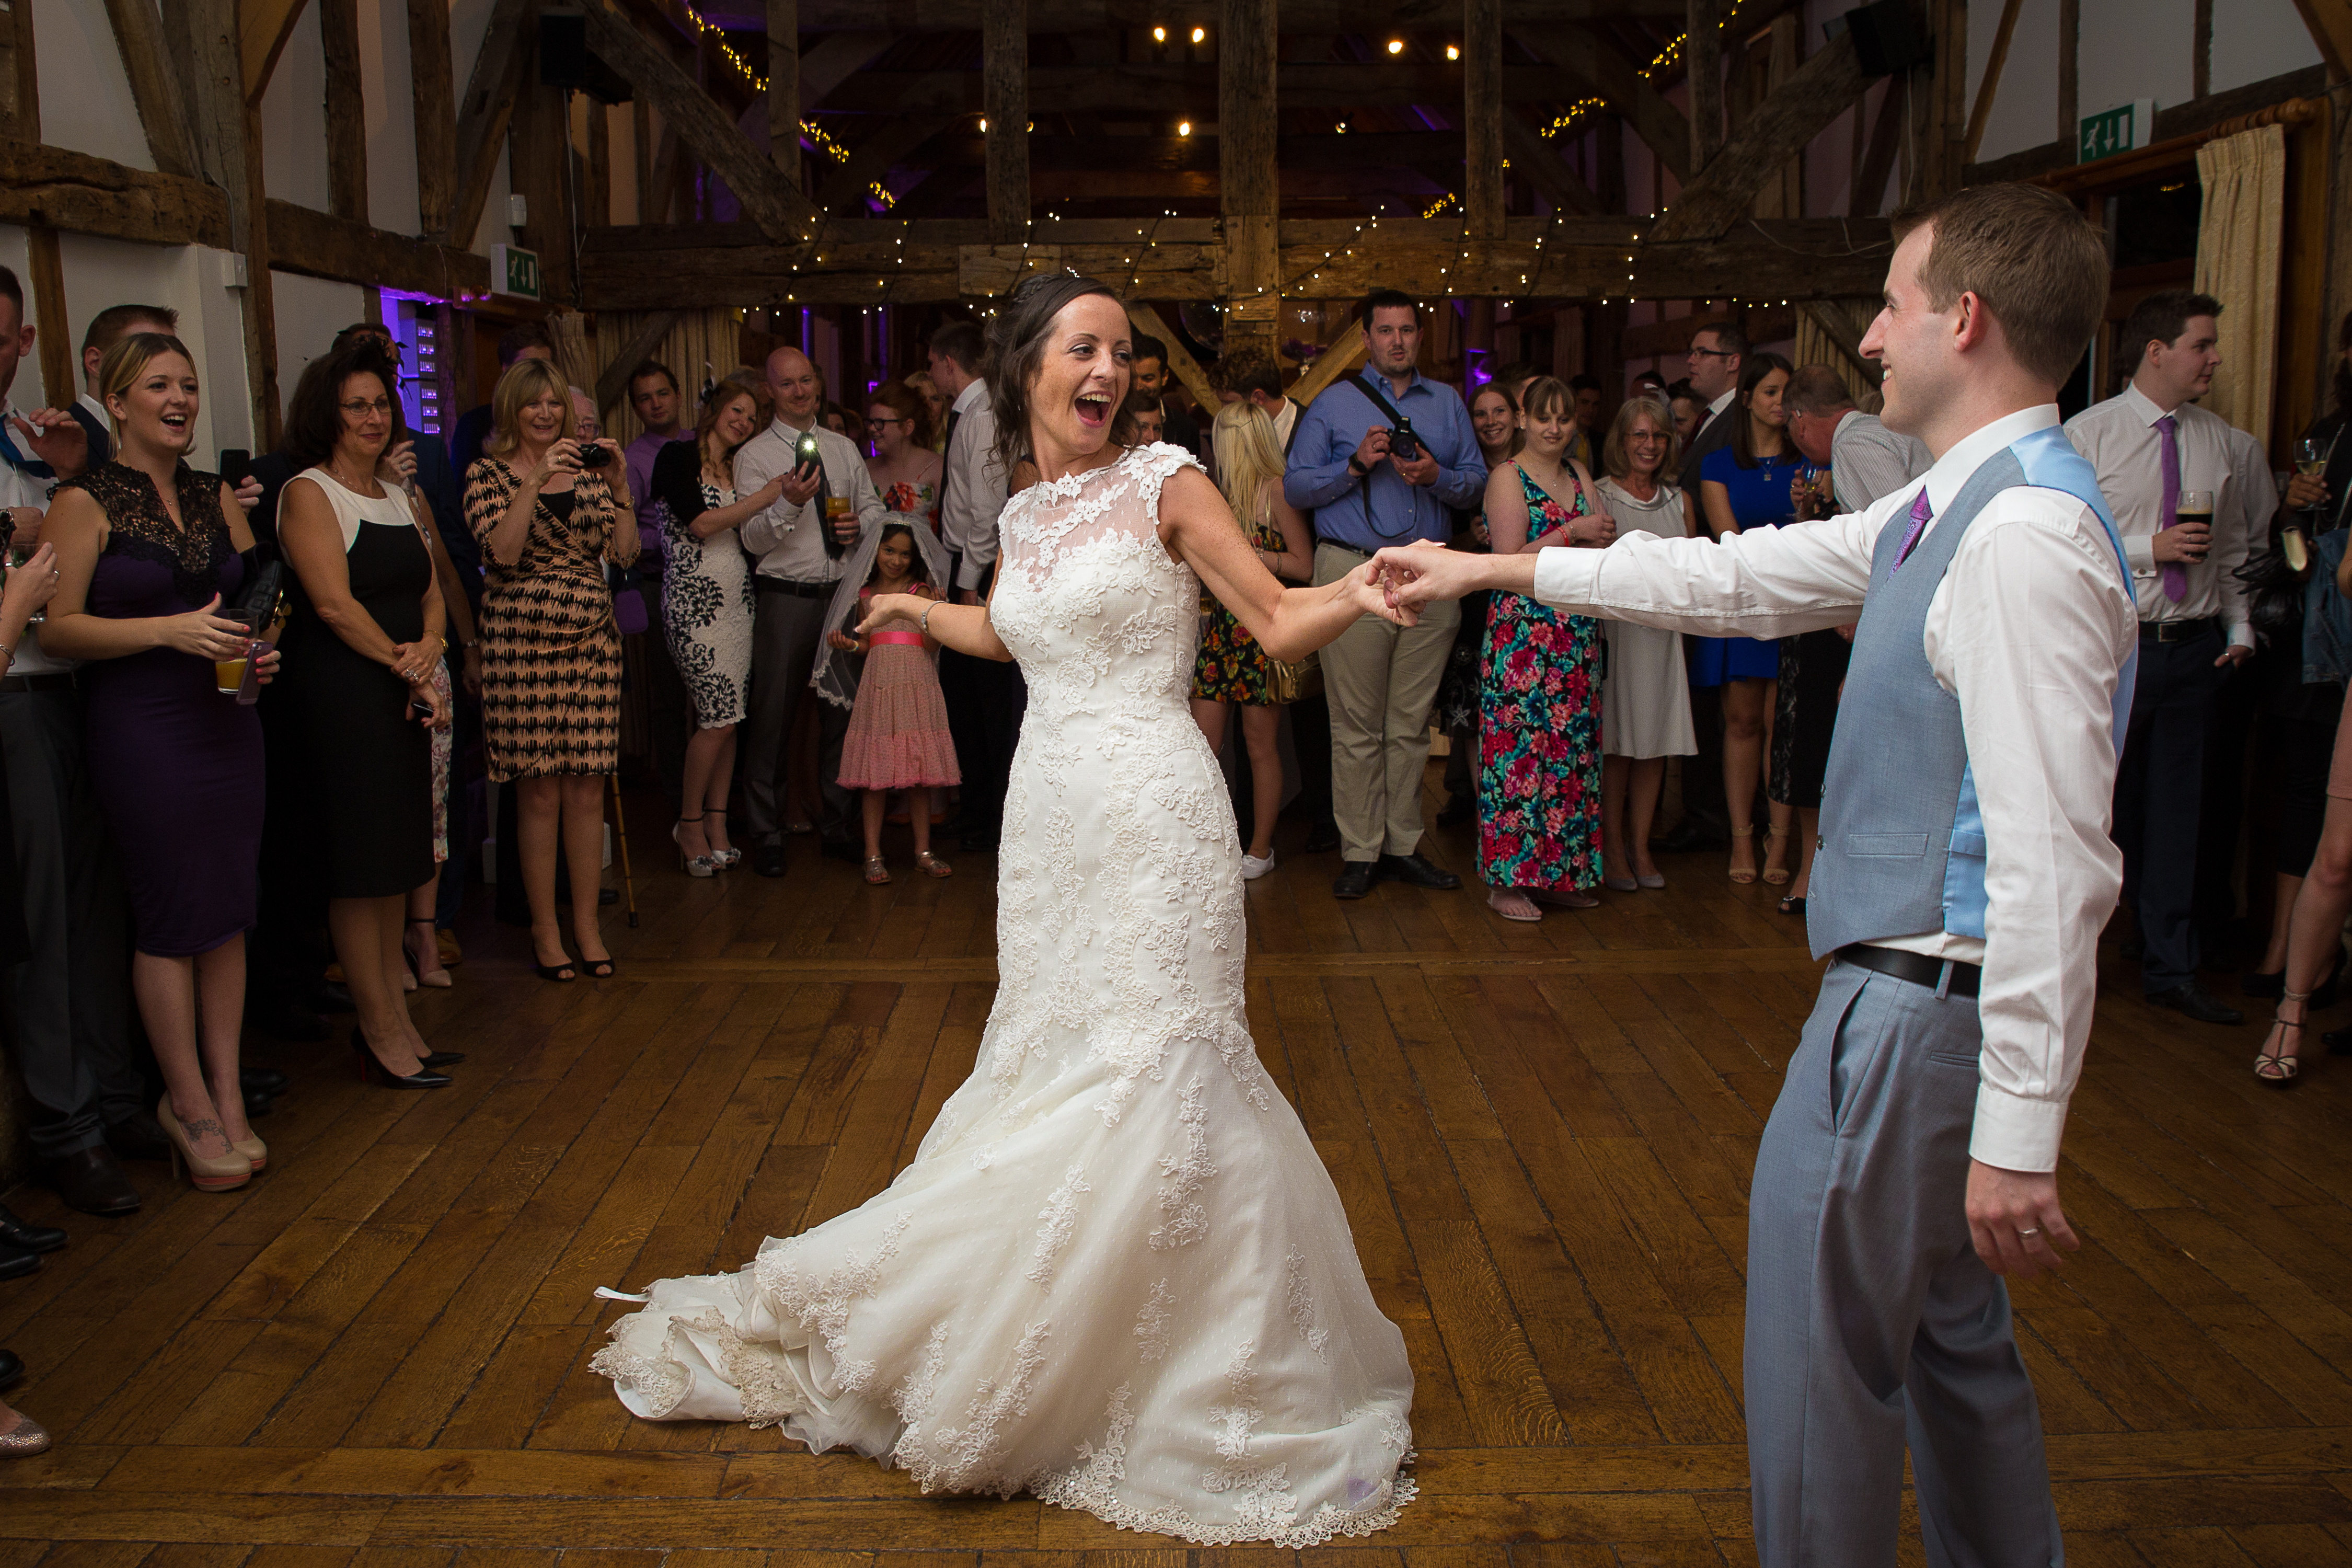 Wedding first dance at Loseley Park with Mighty Fine Wedding DJs